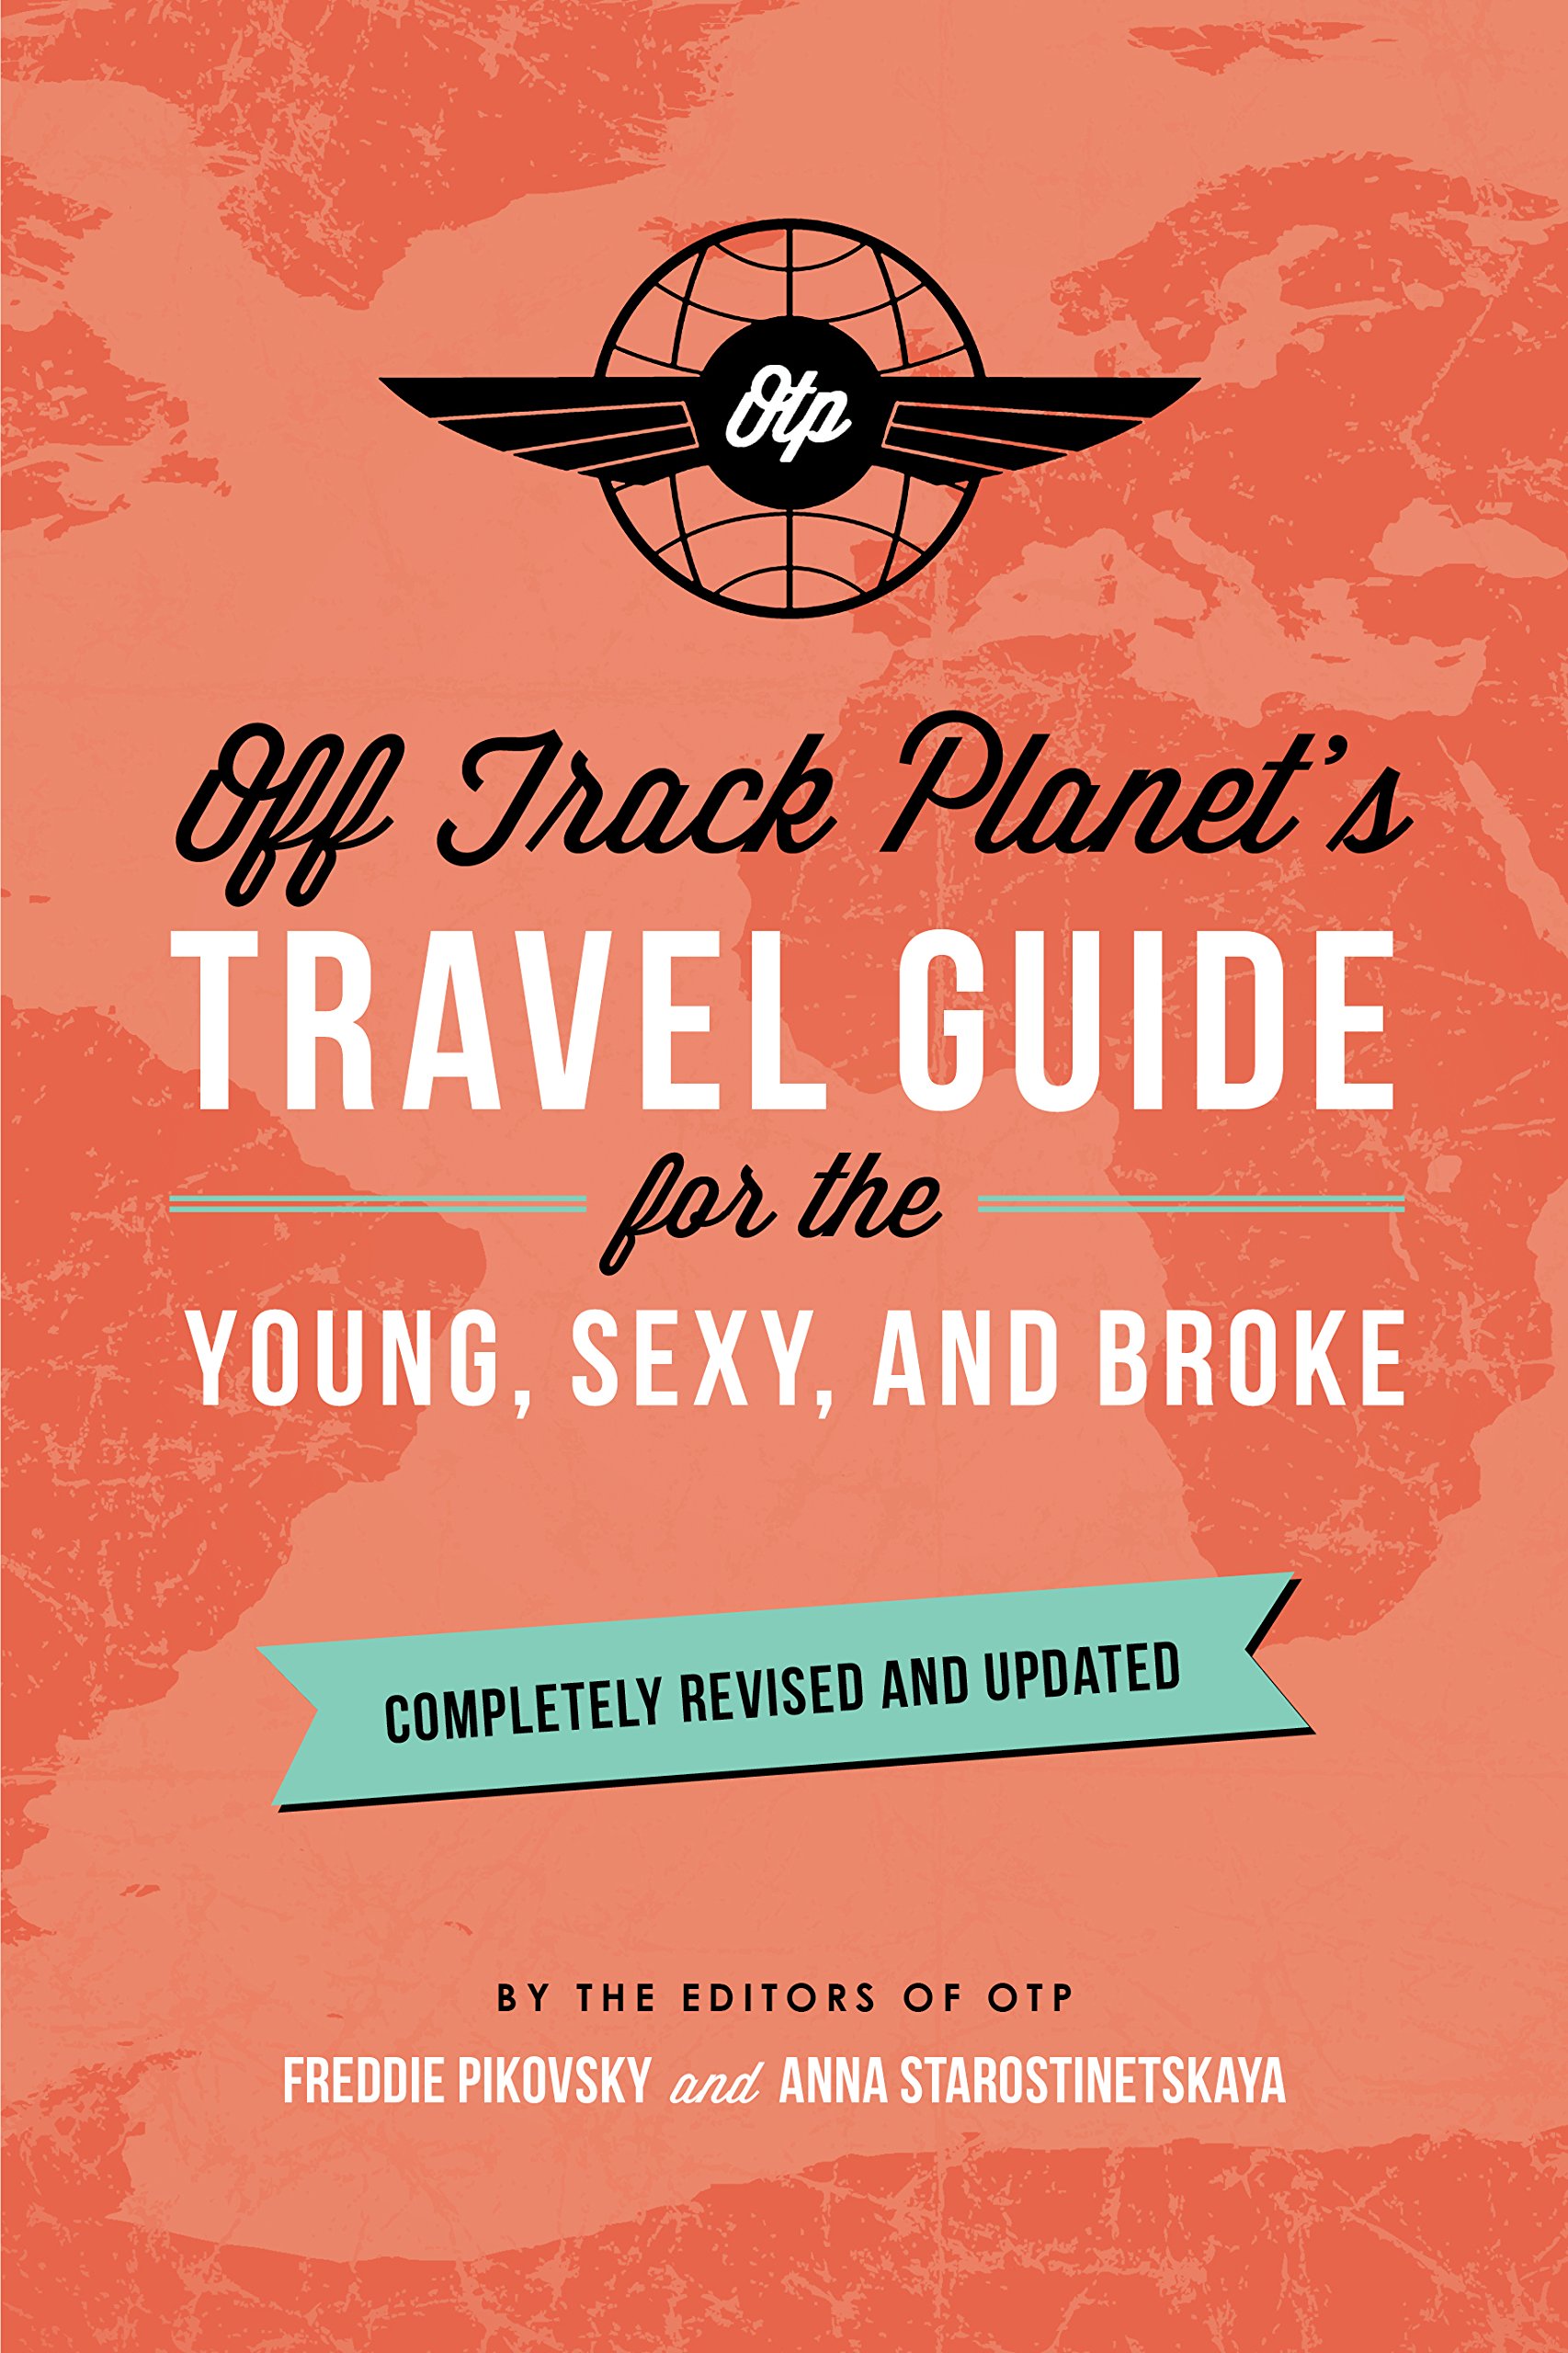 Off Track Planet's Travel Guide for the Young, Sexy, and Broke | Off Track Planet